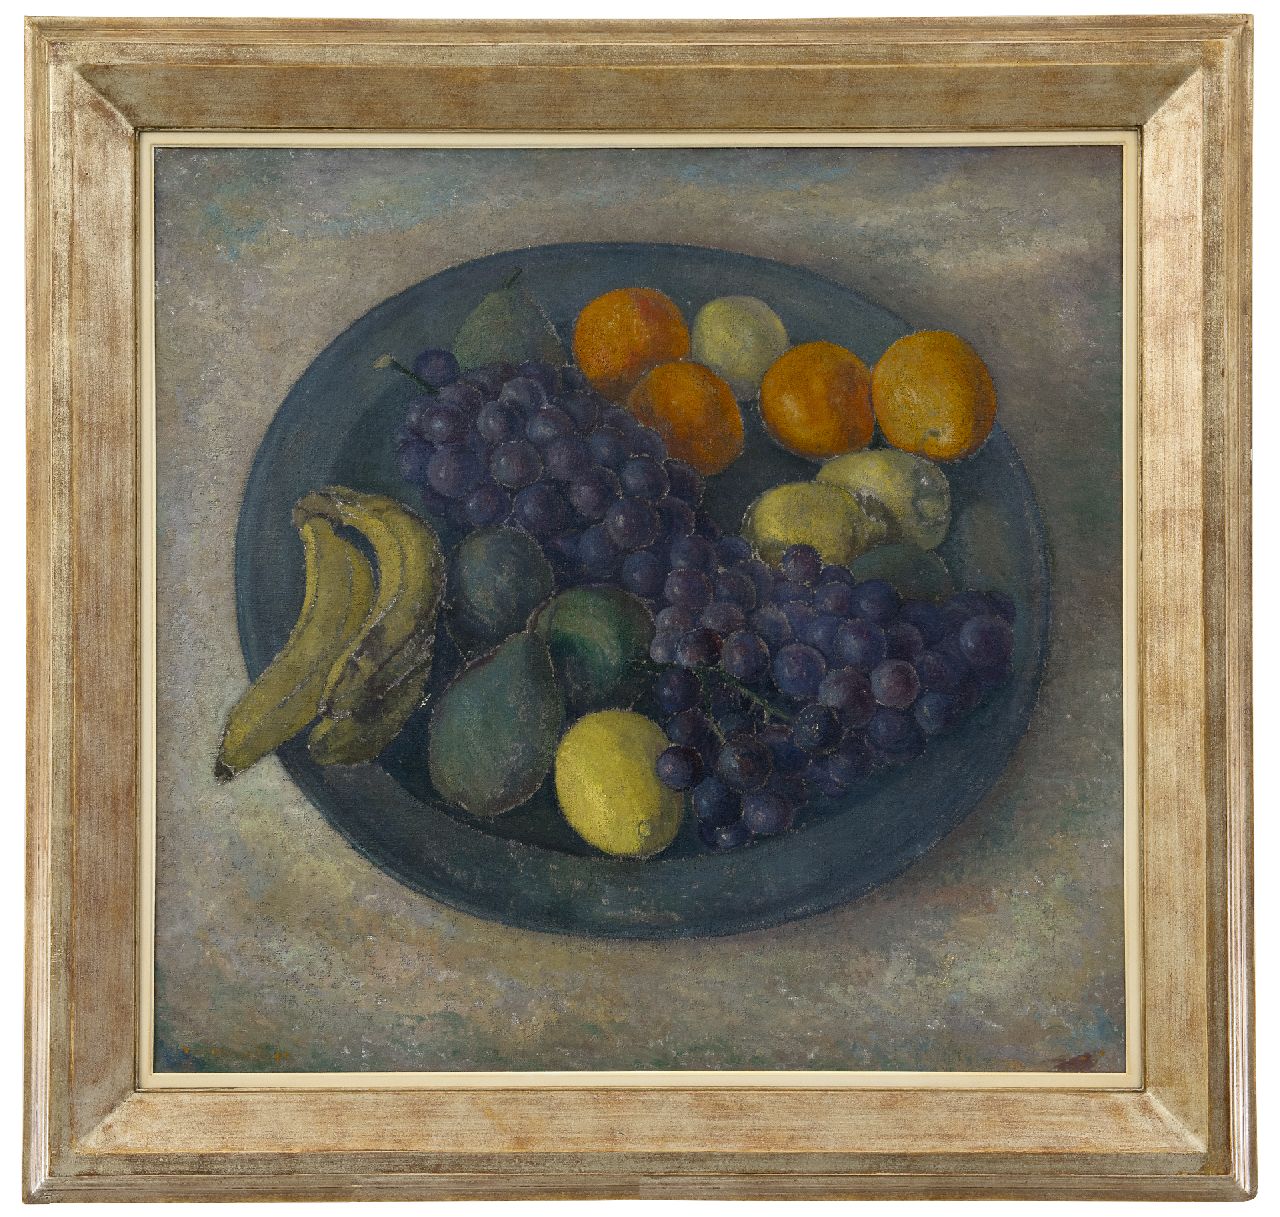 Herwijnen J.A.G. van | Johannes Adrianus George 'Jan' van Herwijnen | Paintings offered for sale | A still life of fruits, oil on canvas 76.1 x 80.0 cm, signed l.l. and executed ca. 1936-1937